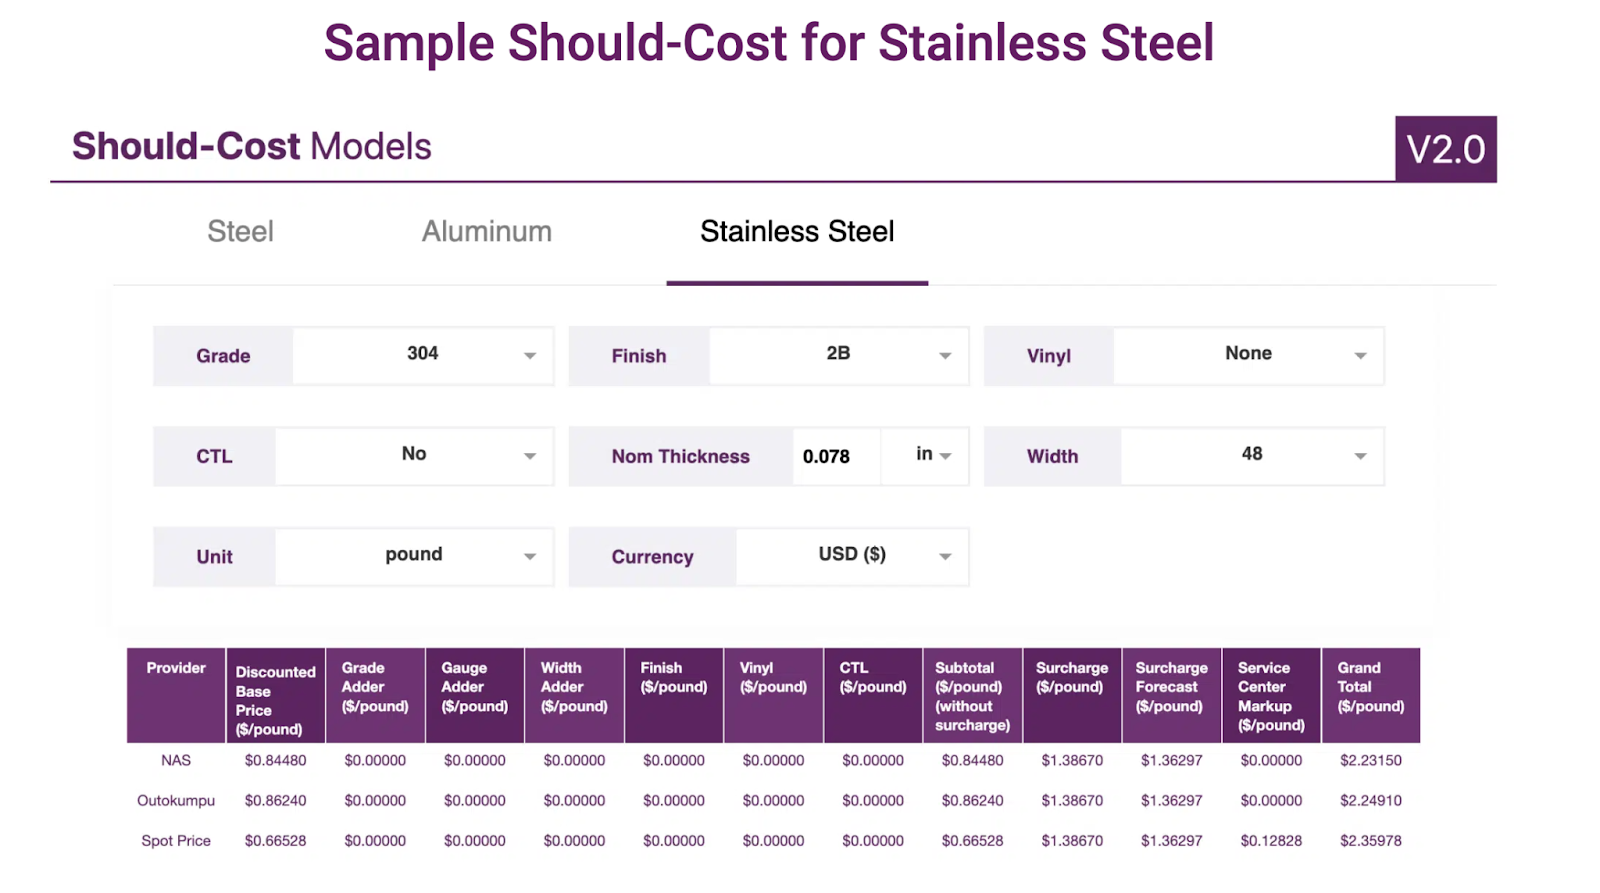 should-cost models, MetalMiner, stainless steel prices